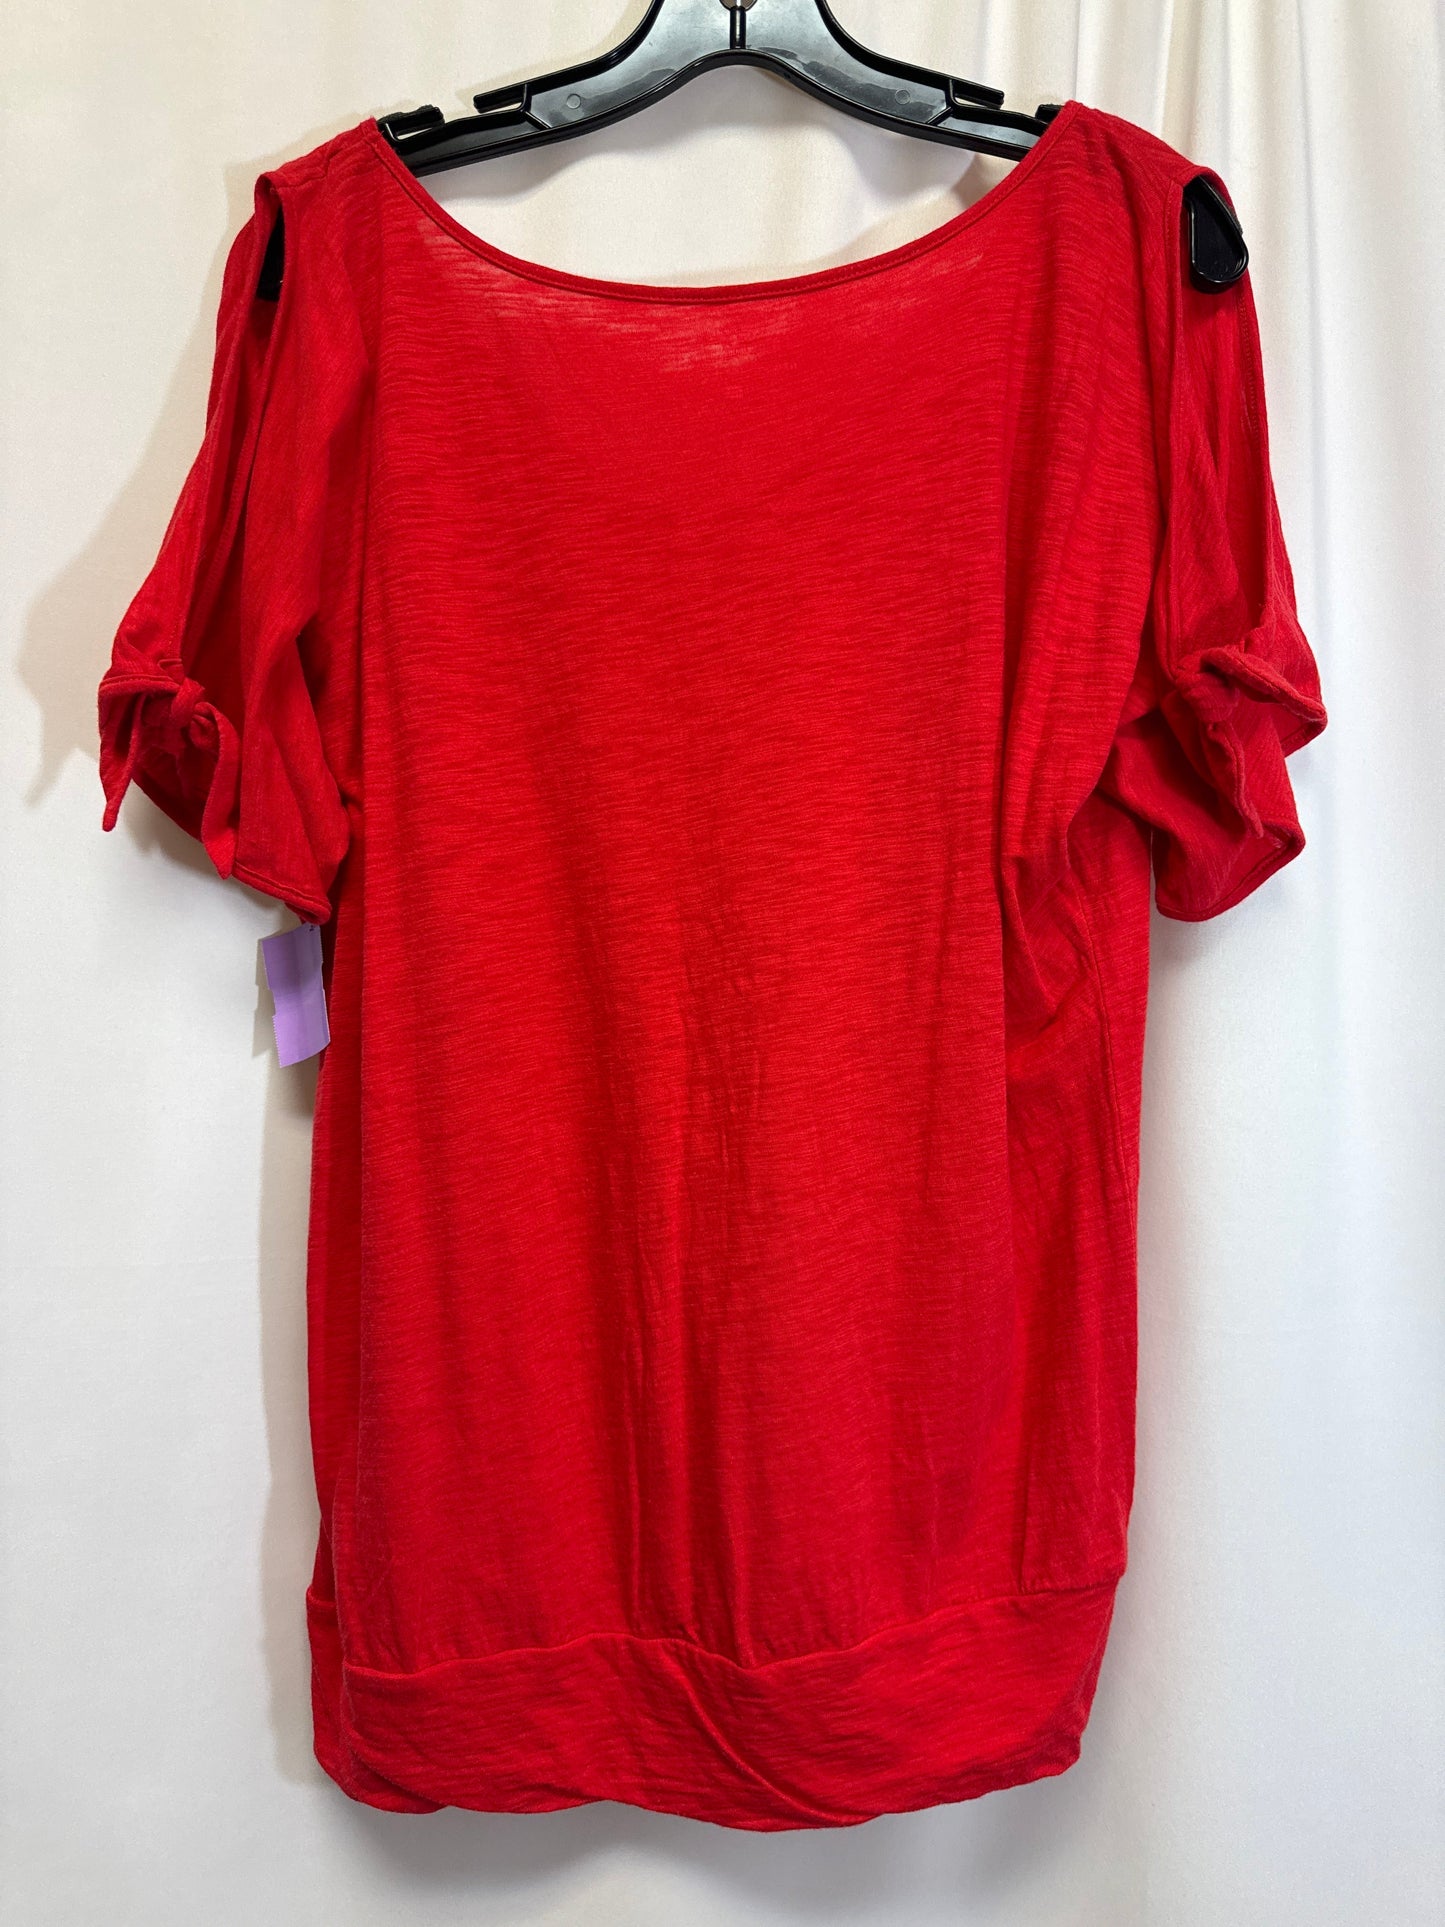 Red Top Short Sleeve New York And Co, Size M